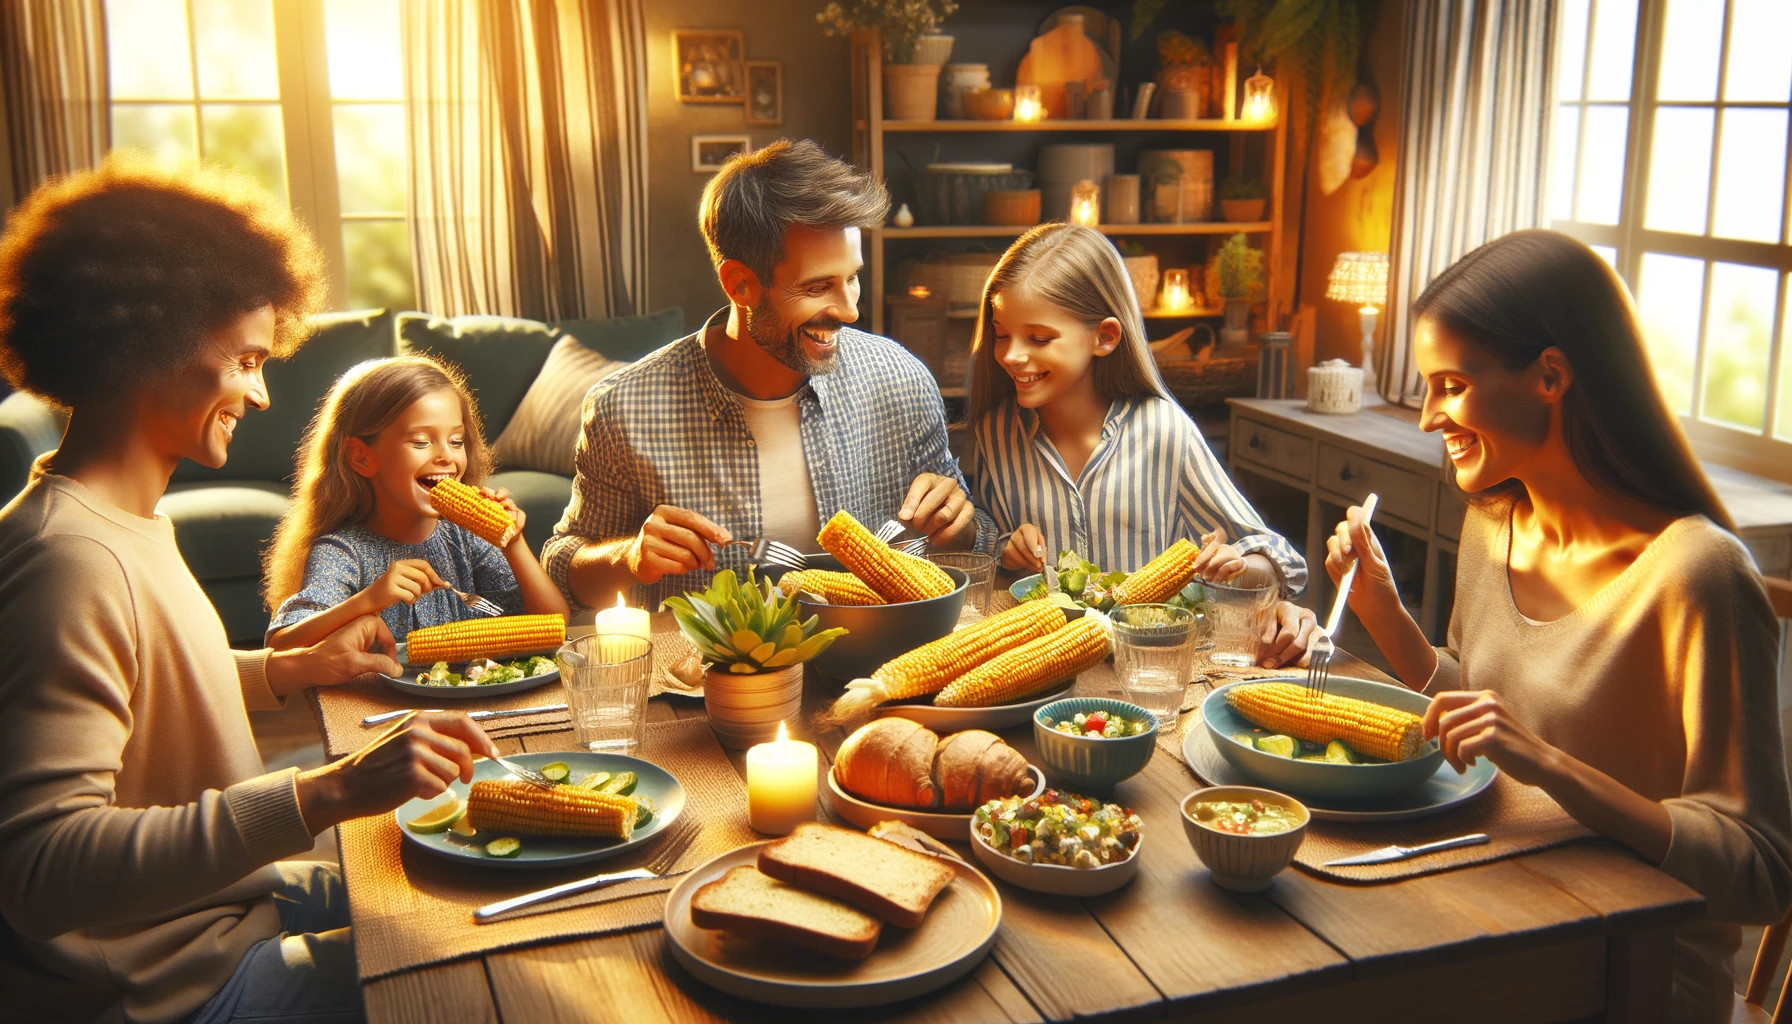 A warm, inviting image of a family enjoying a meal together, where dishes featuring corn are prominently displayed on the table.